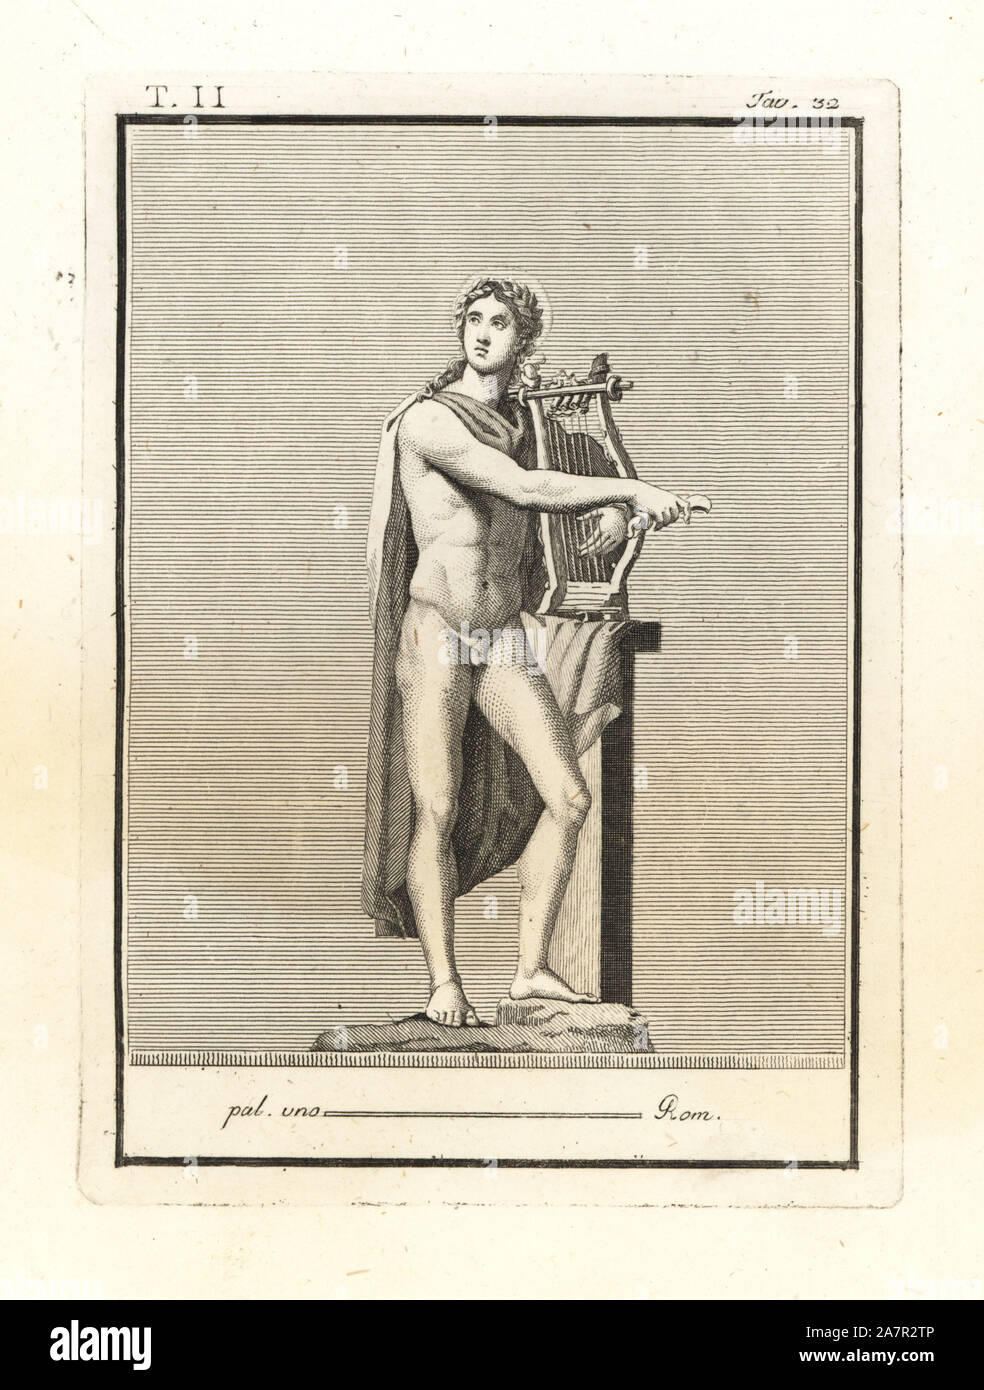 Statue of Apollo in copper. He is depicted with halo, cithara (lyre) and plectrum. Copperplate engraving by Tommaso Piroli from his Antiquities of Herculaneum (Antichita di Ercolano), Rome, 1789. Stock Photo